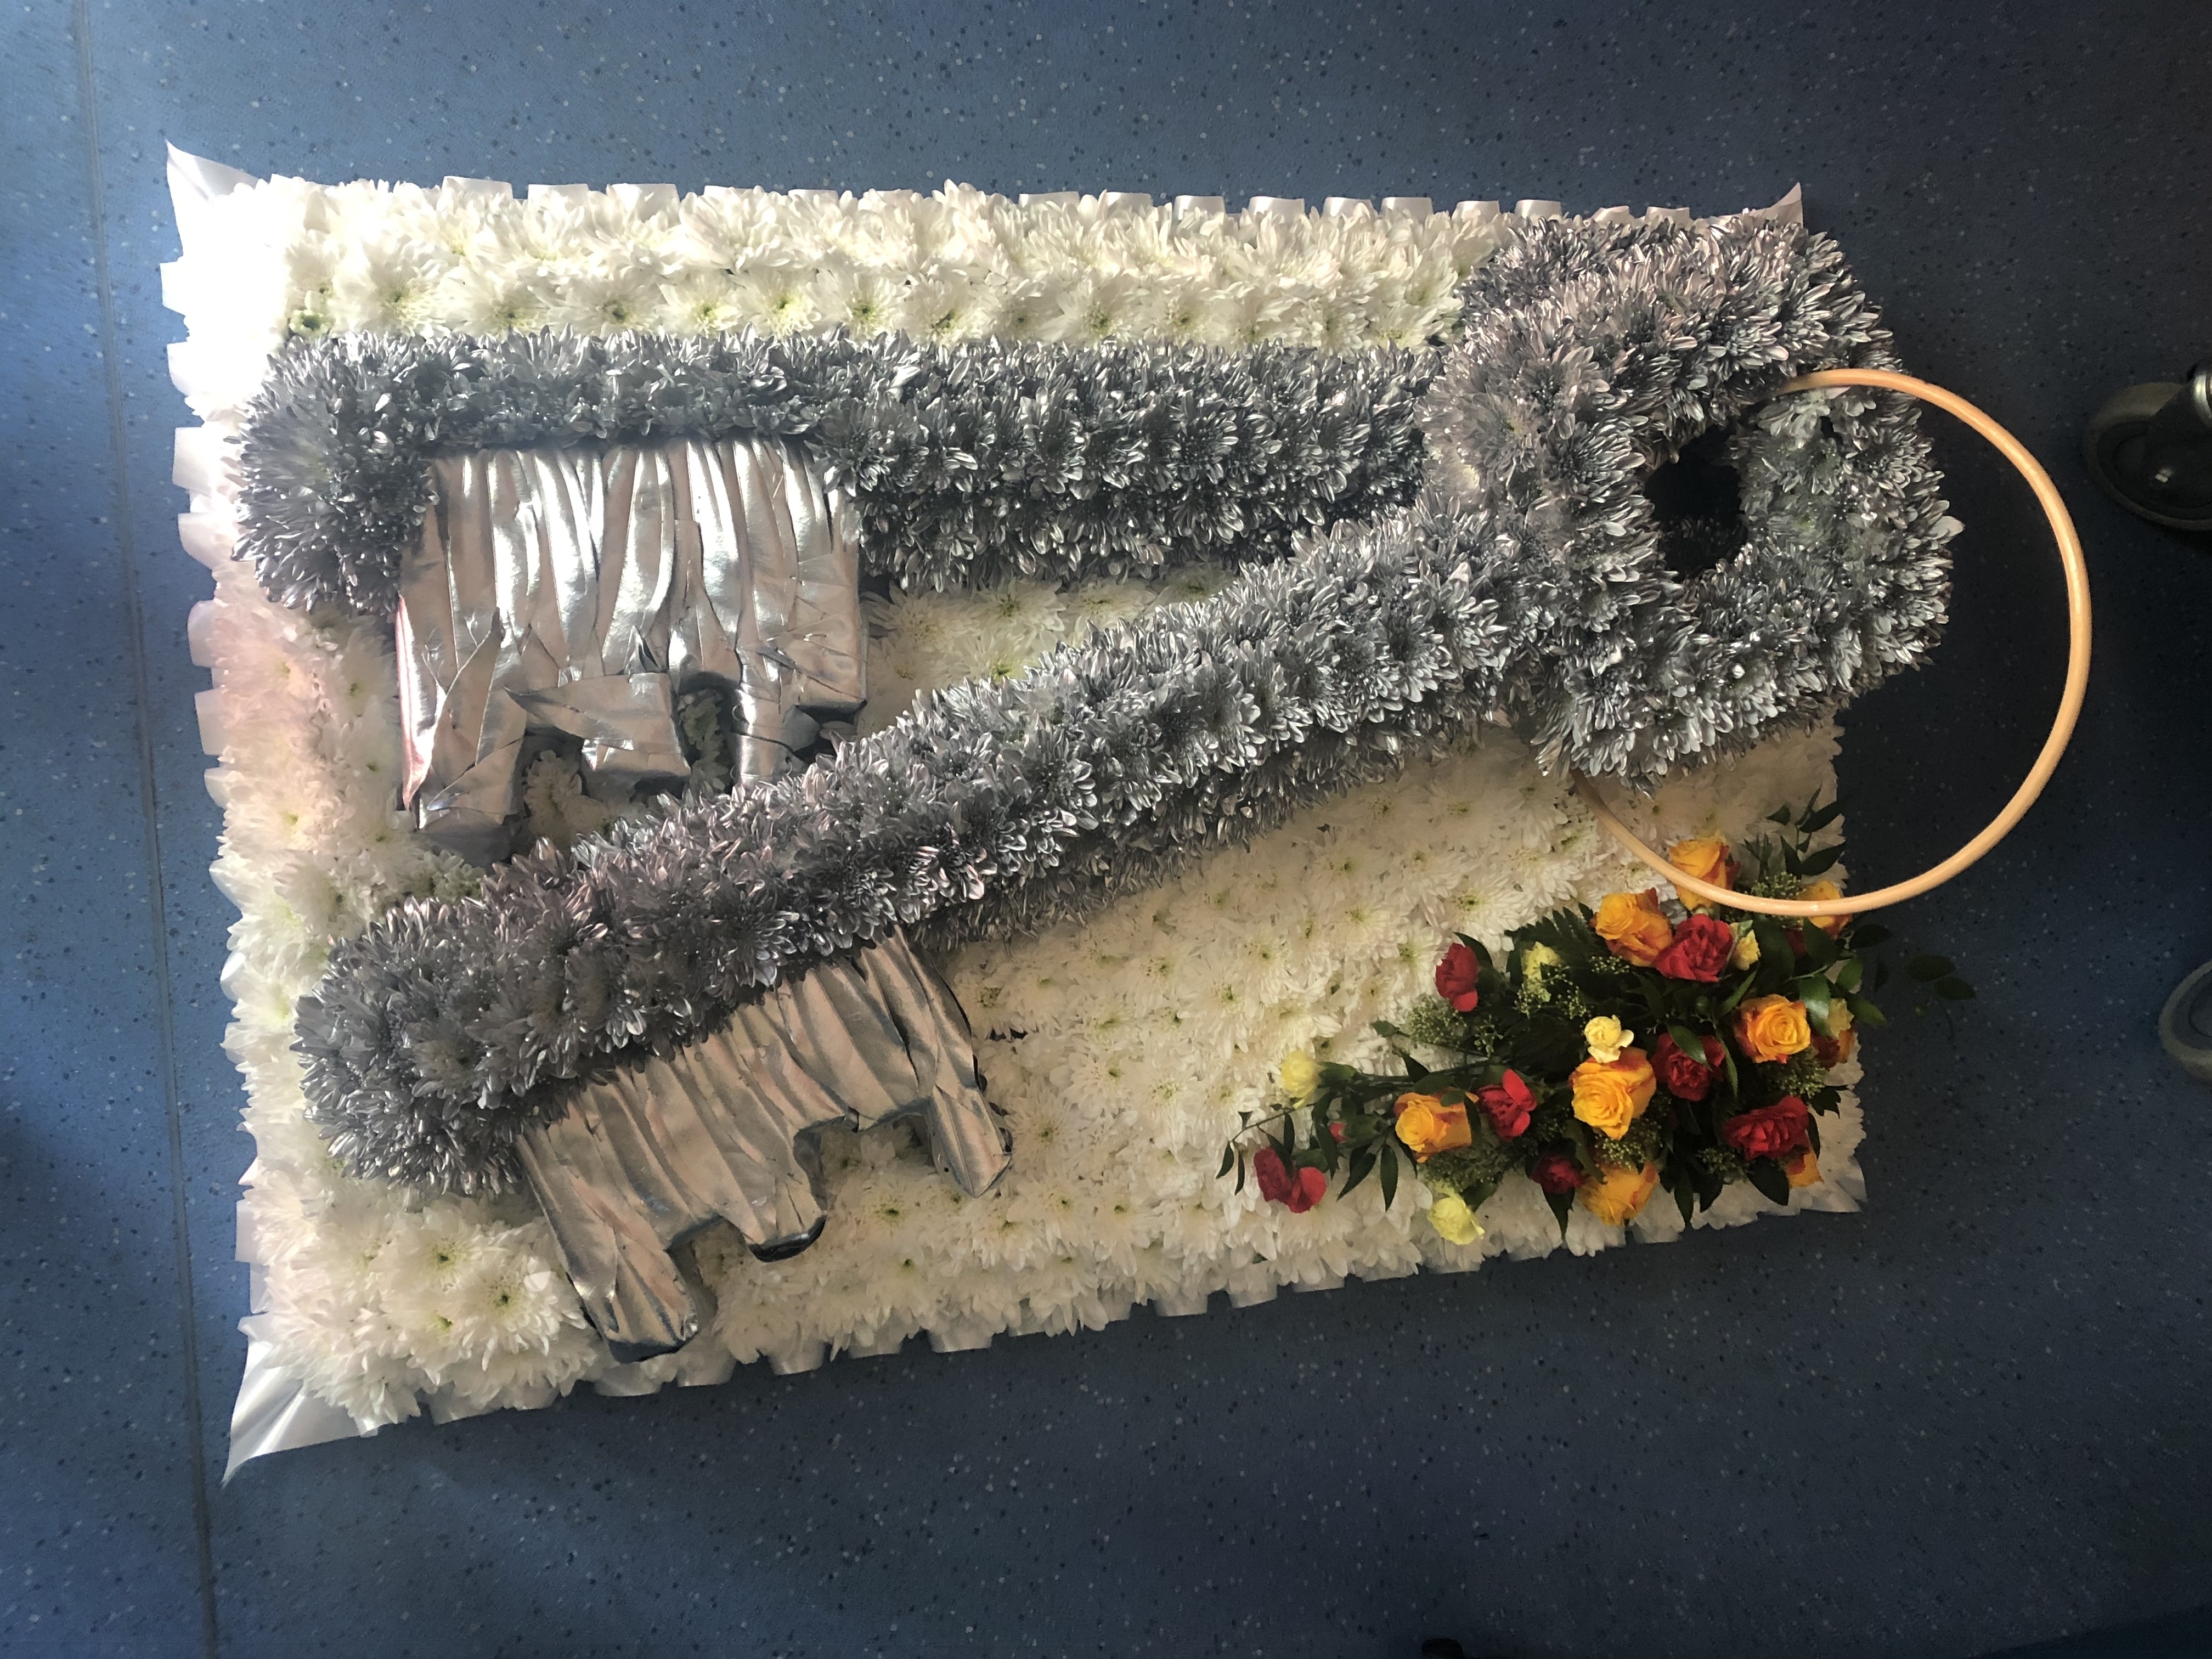 Keys made from flowers